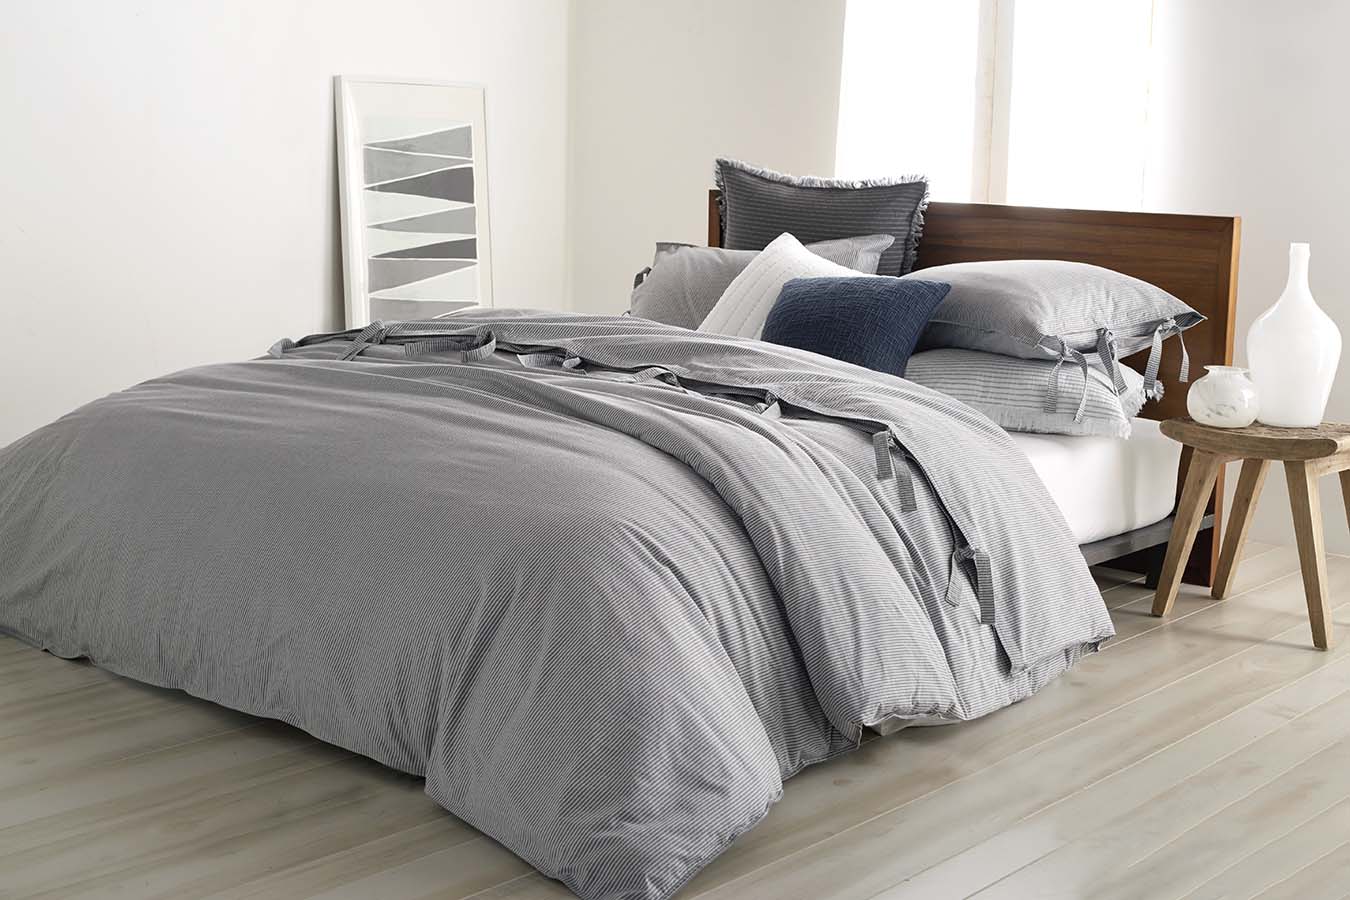 DKNY PURE Stripe Duvet Collection